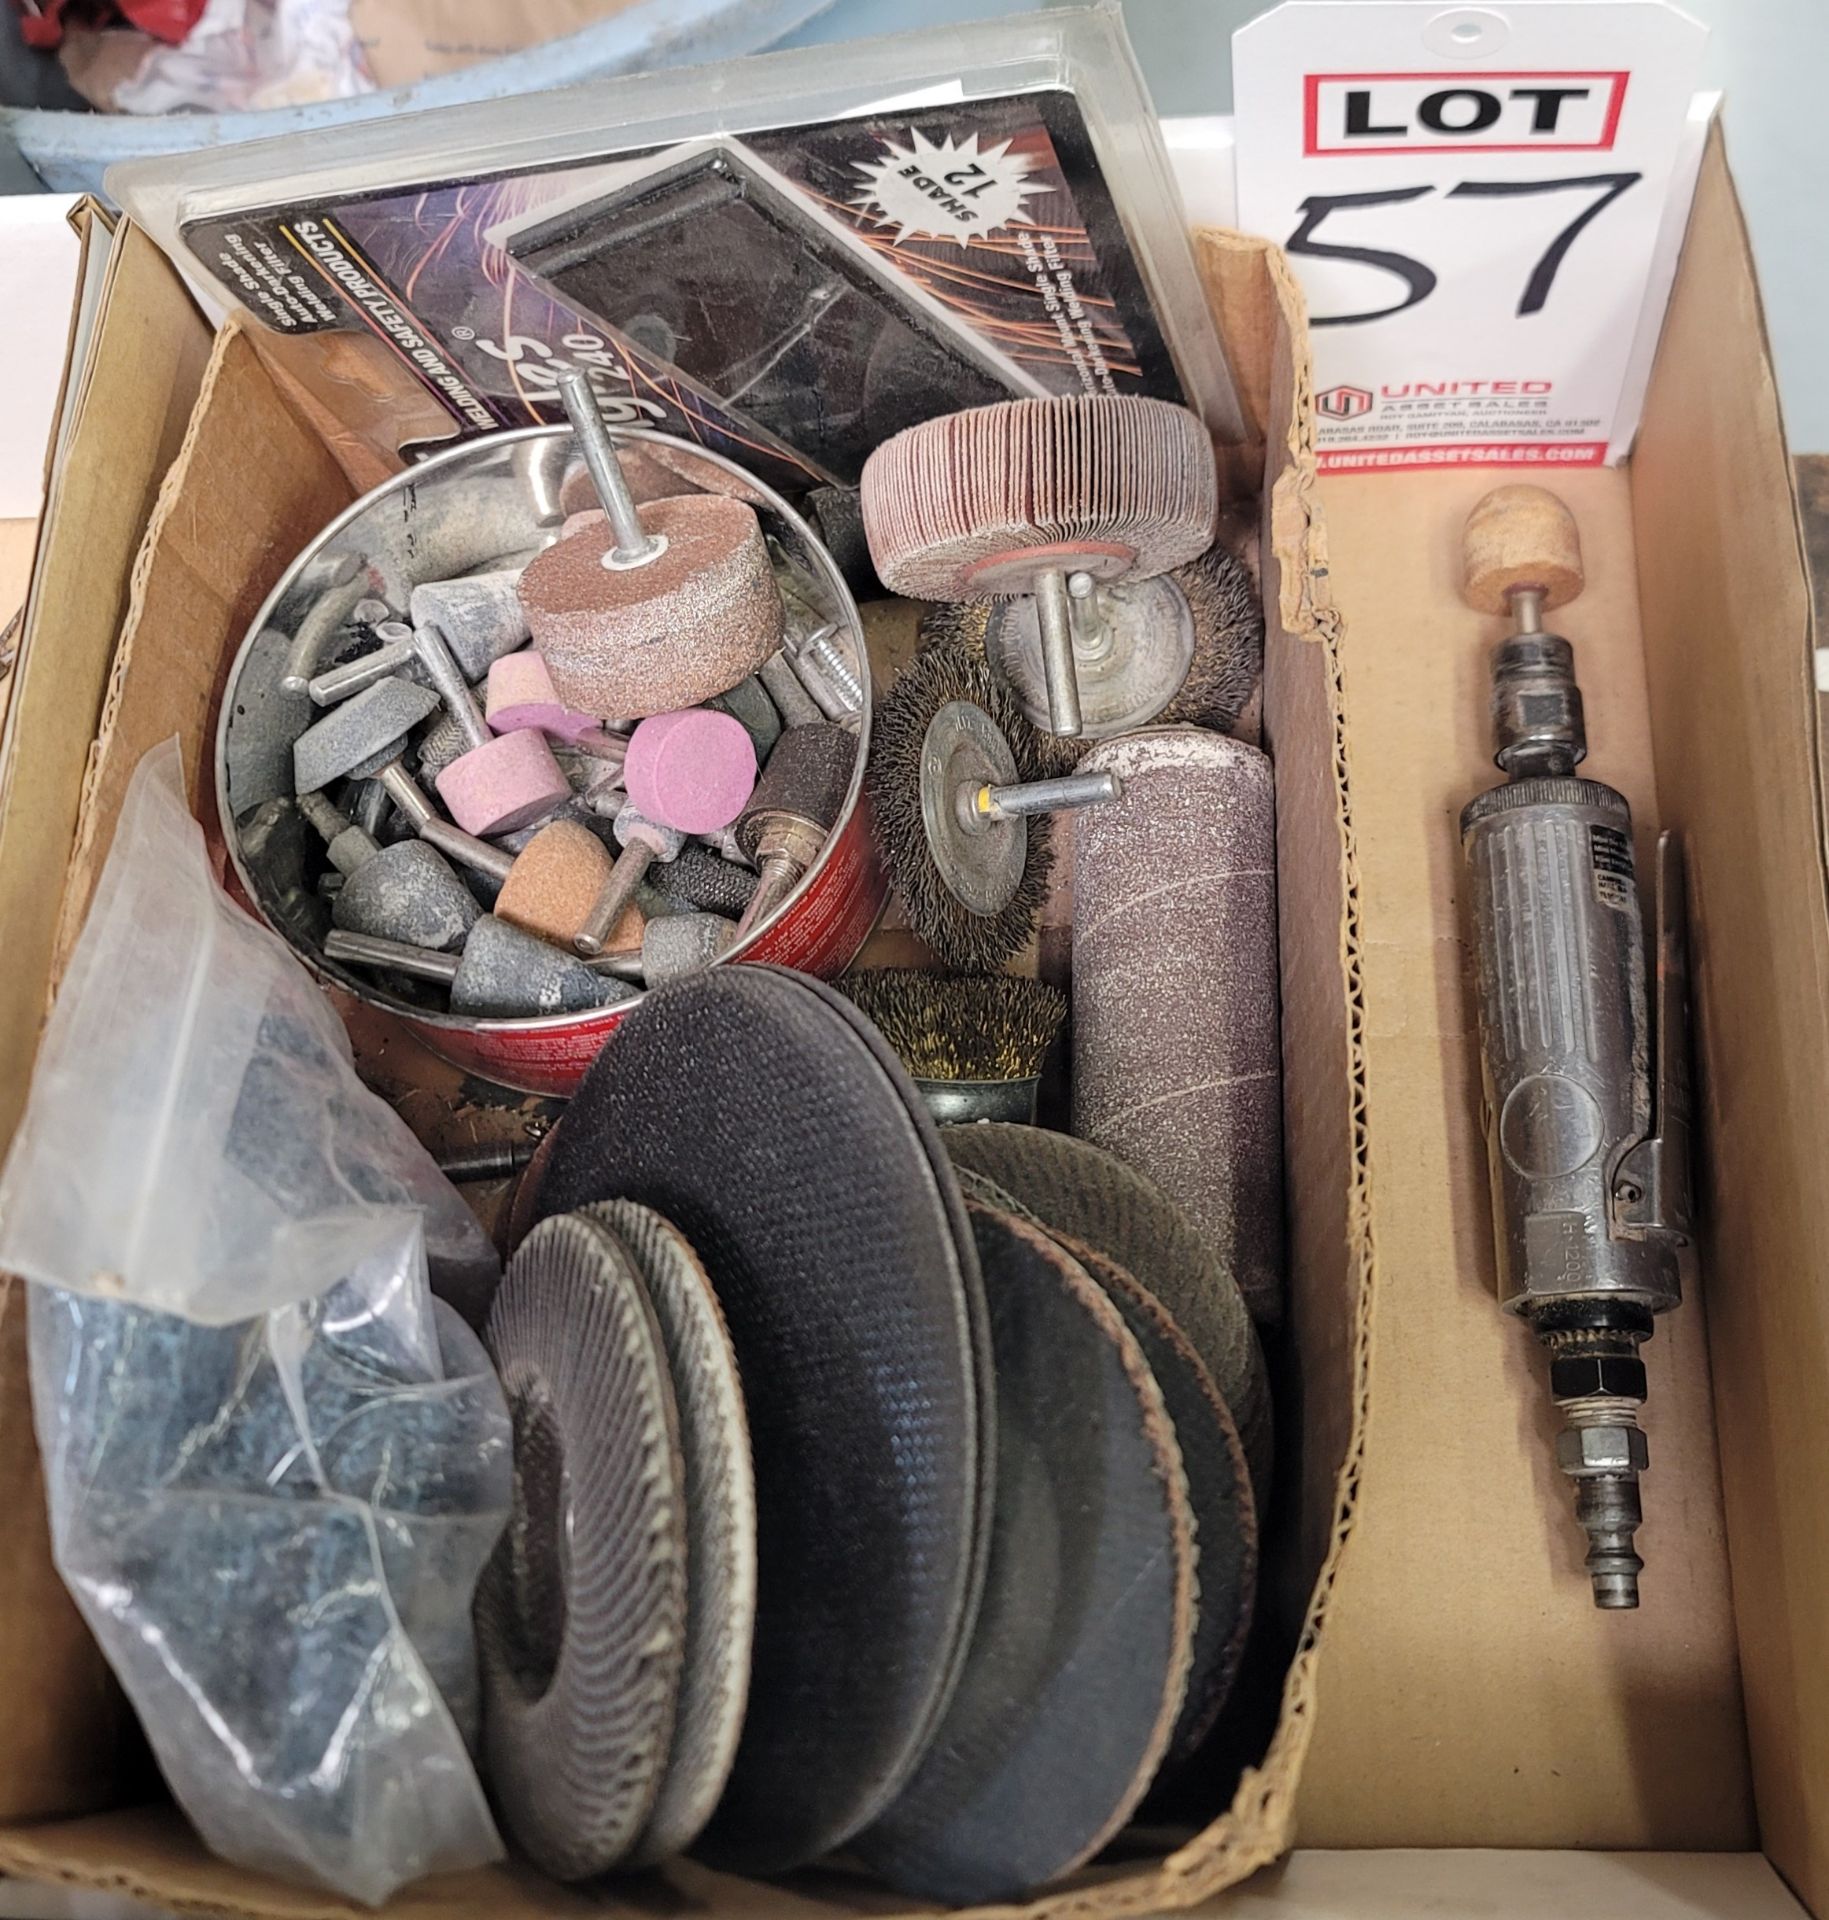 LOT - CAMPBELL HAUSFELD MINI DIE GRINDER, MISC. ABRASIVE STONES, WHEELS, WIRE BRUSHES